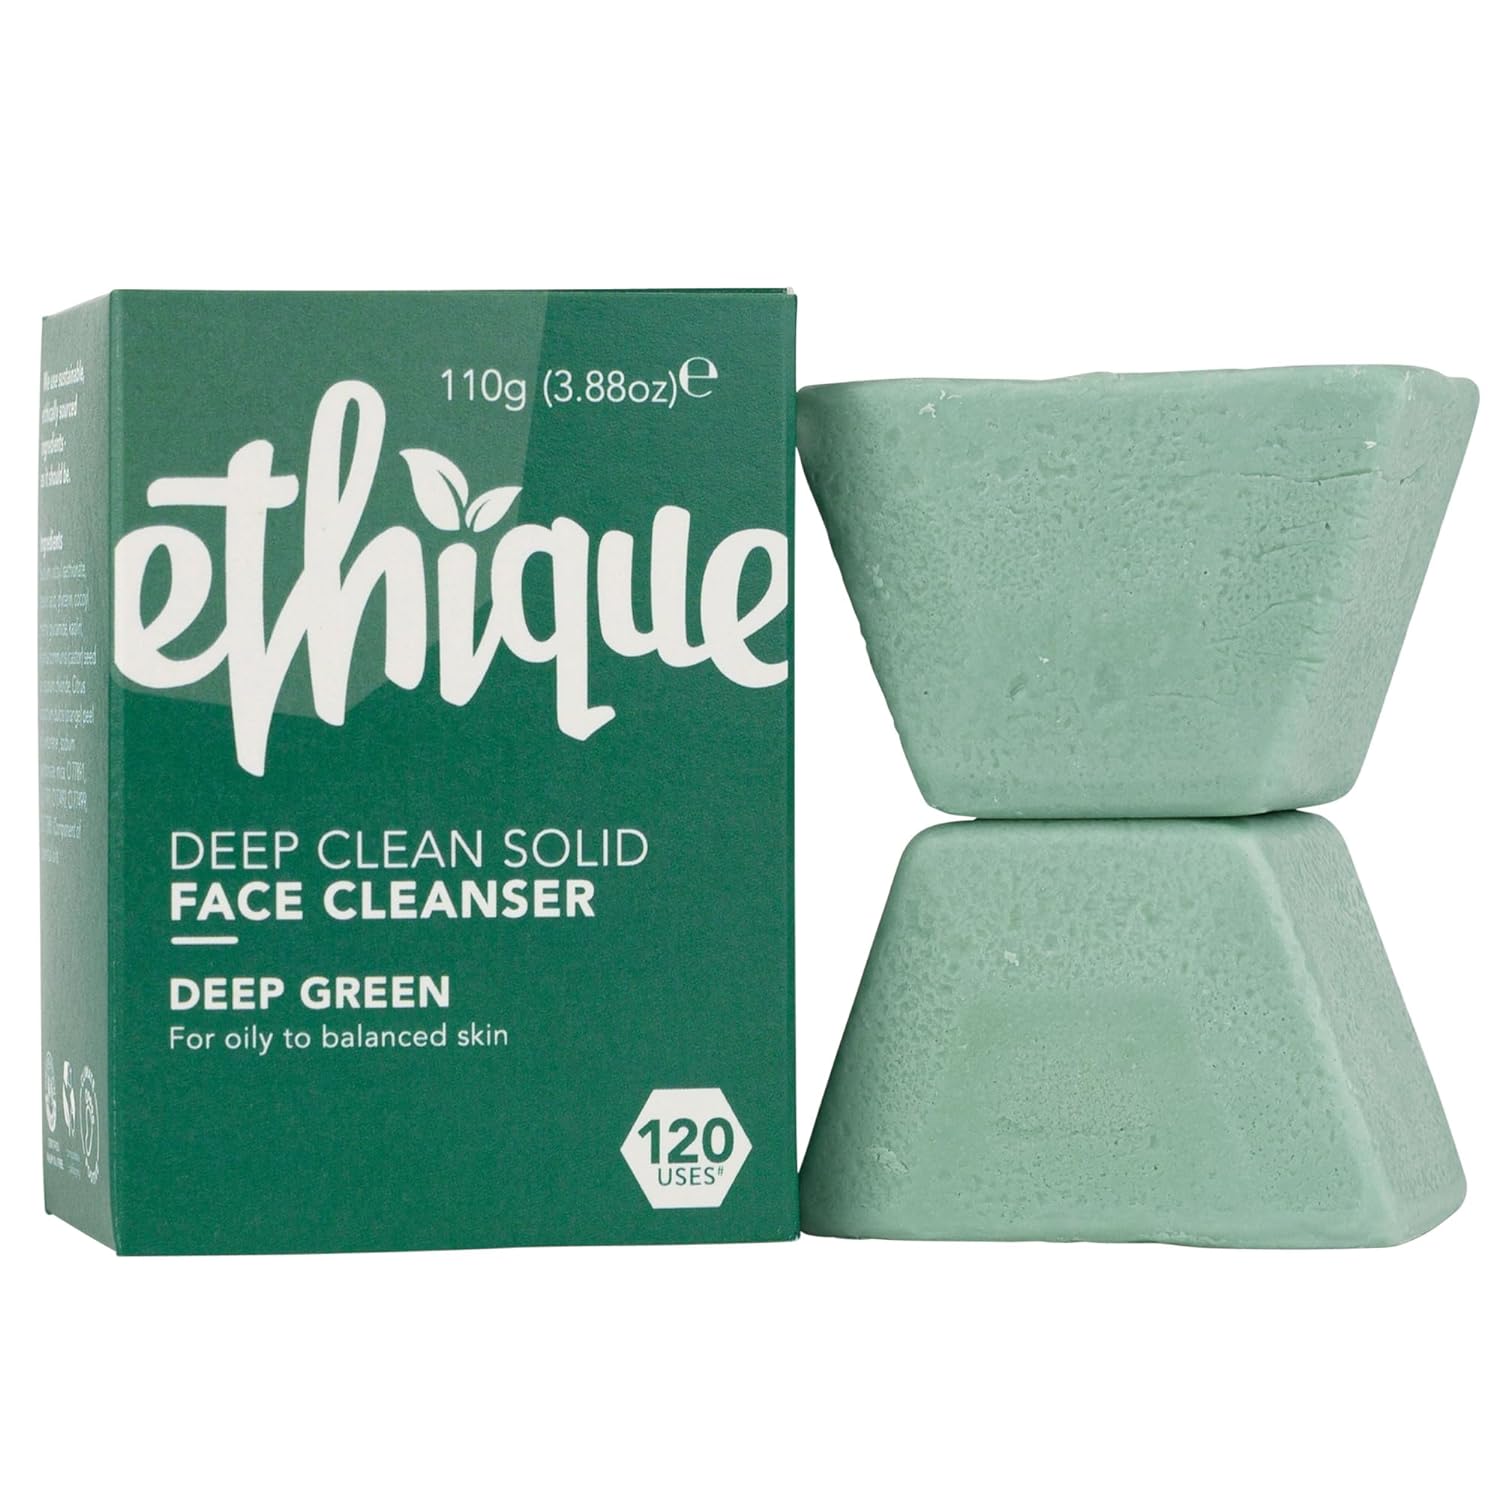 Ethique Deep Cleaning Solid Natural Face Cleanser for Oily to Balanced Skin - Deep Green - Vegan, Eco-Friendly- Zero-Waste, Plastic-Free, Cruelty-Free, 3.53 oz (Pack of 1:4 Bars)